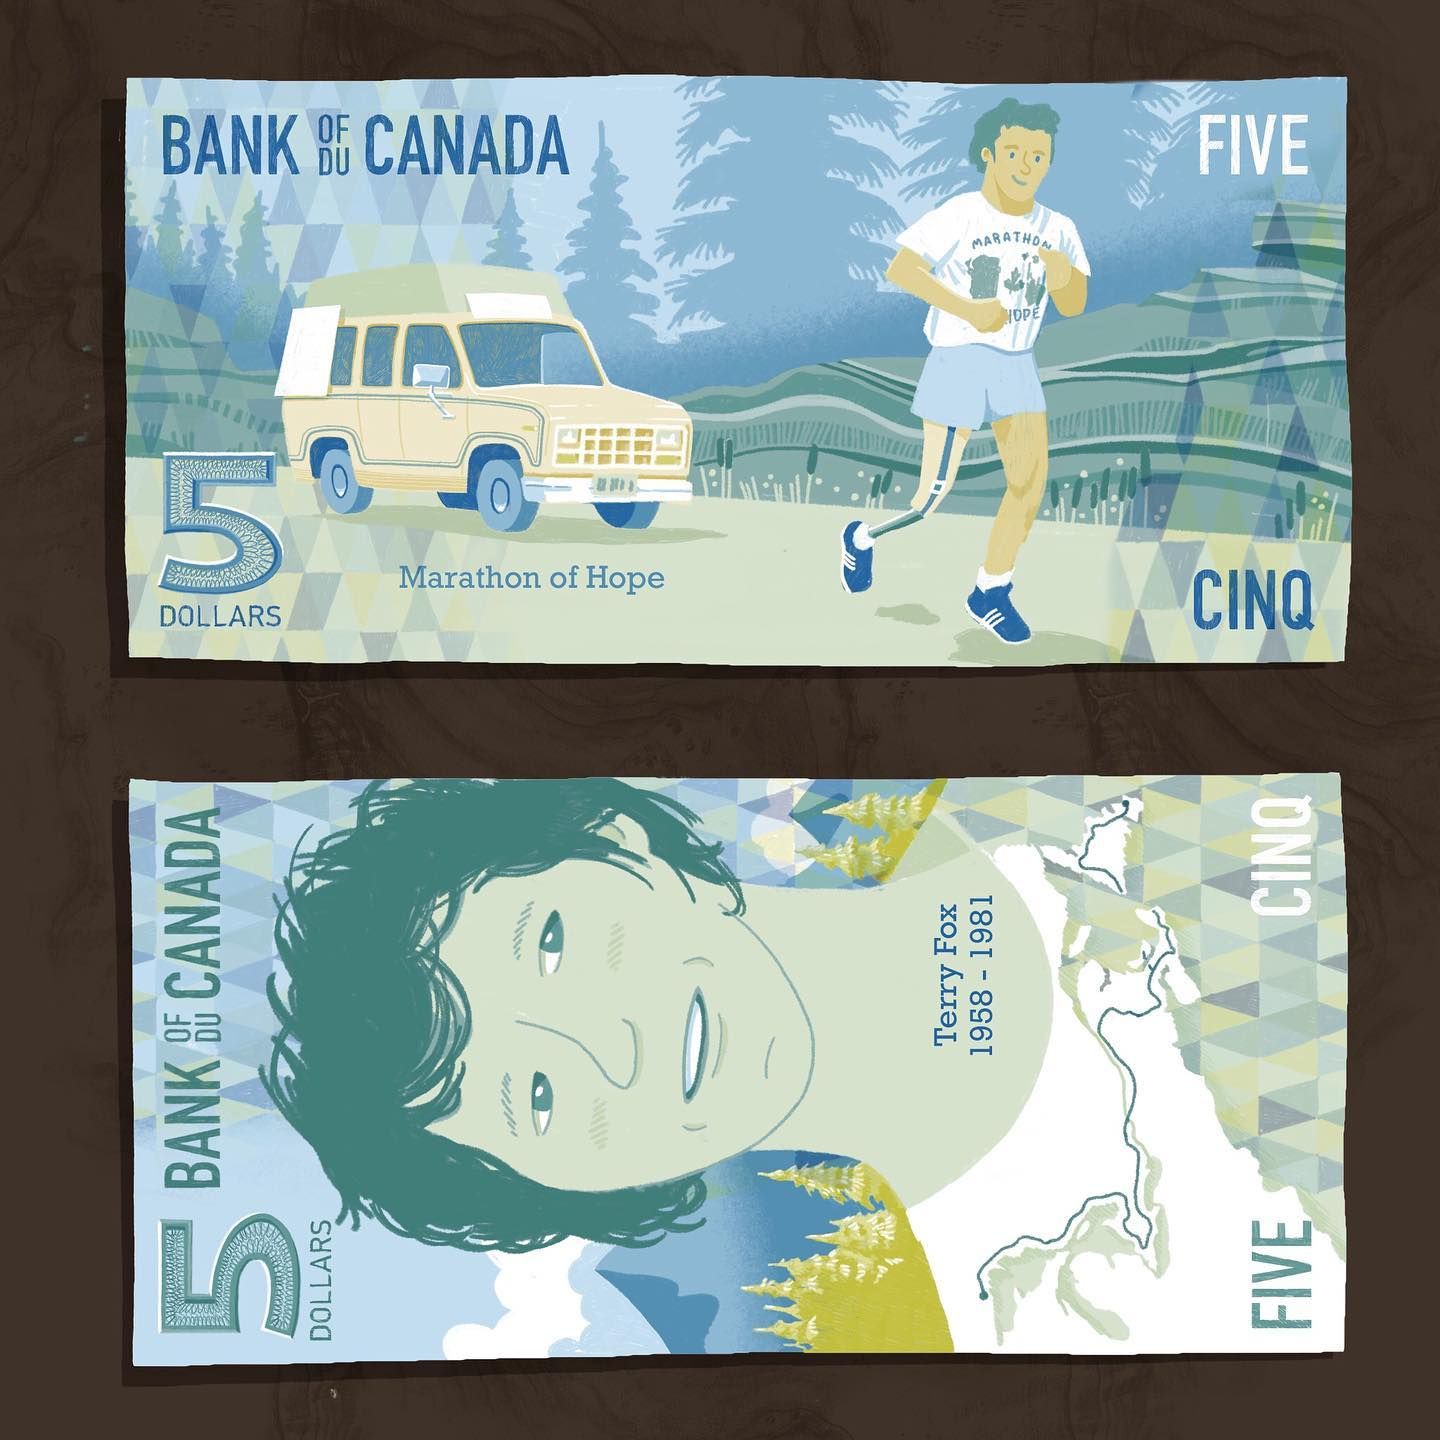 Terry Fox $5 bank note by Paul Dotey